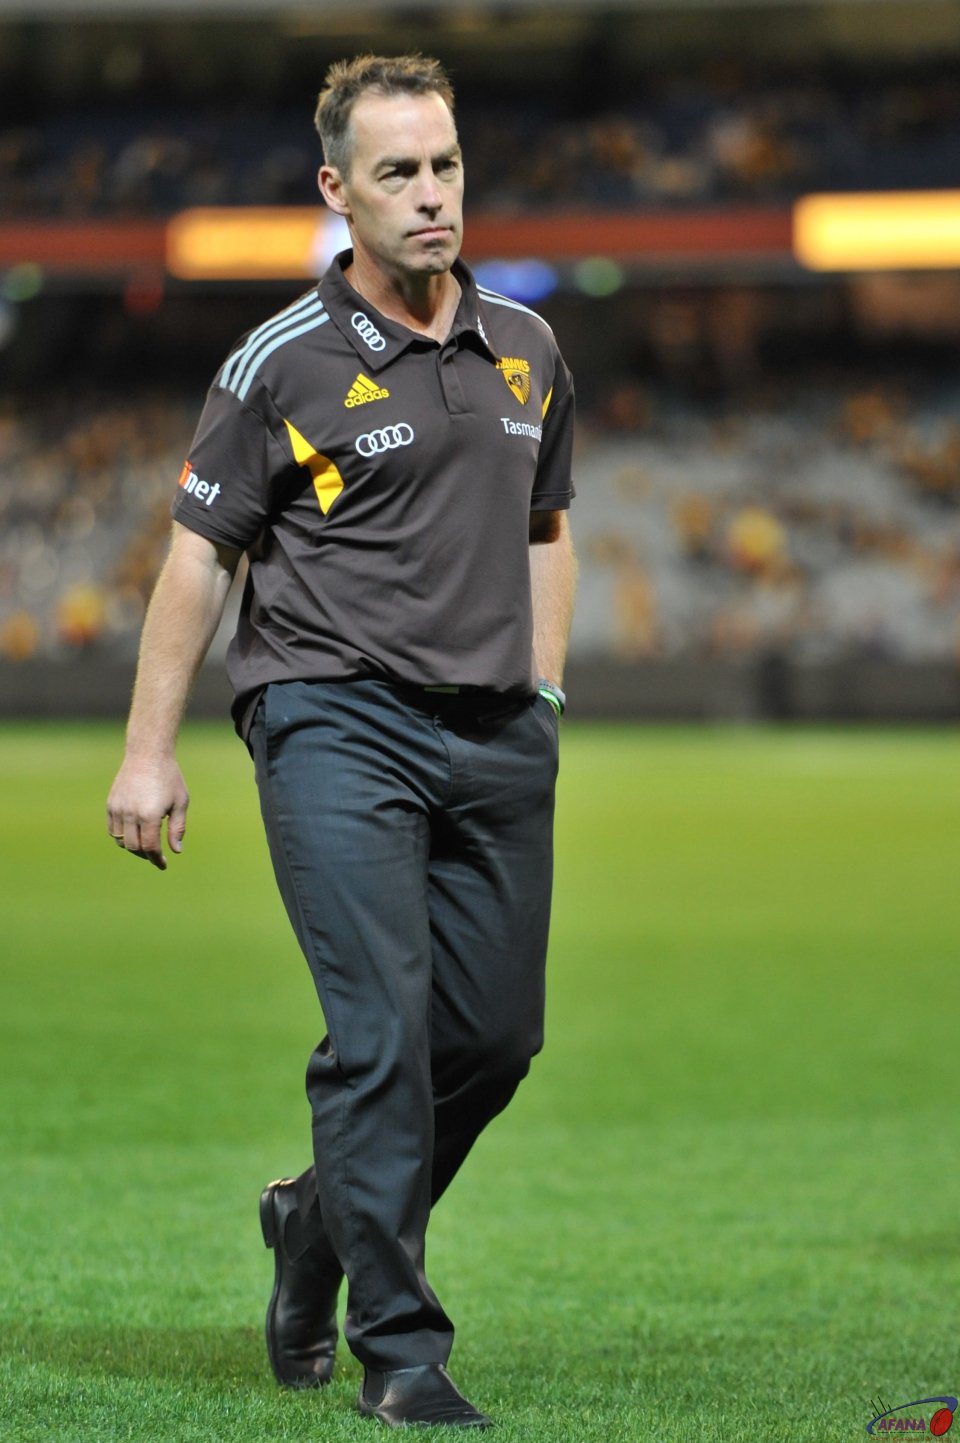 Alistair Clarkson Hawks premiership coach extends contract with Hawthorn